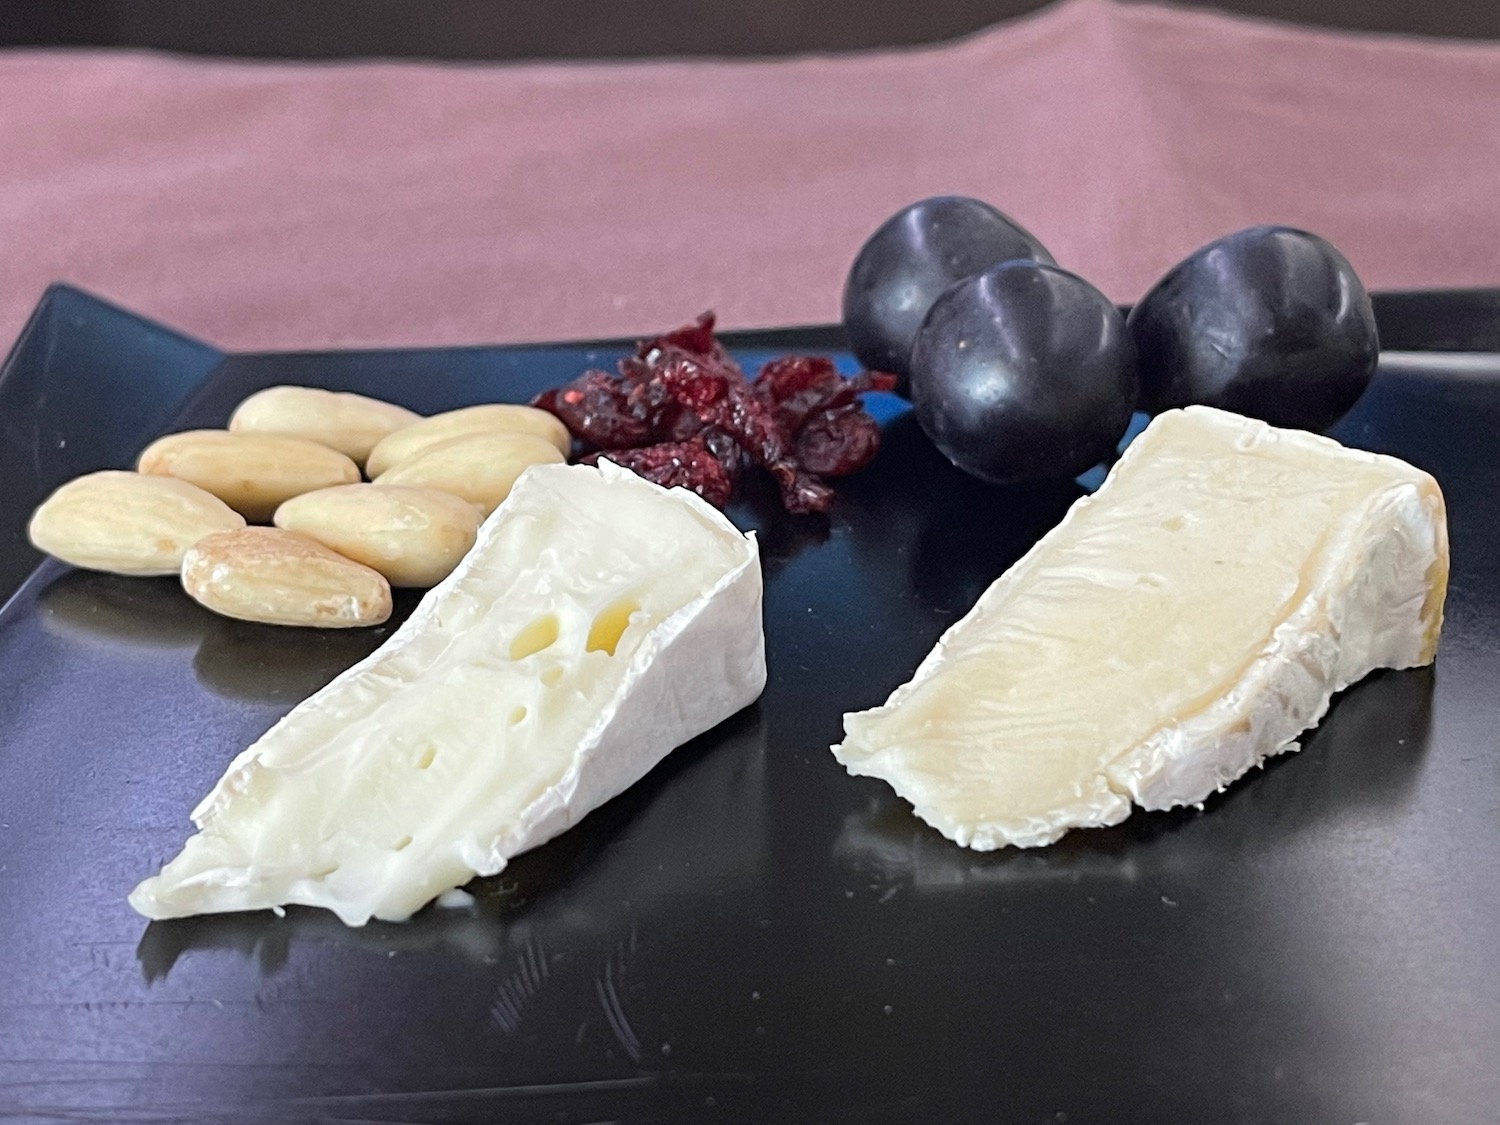 a plate of cheese and grapes